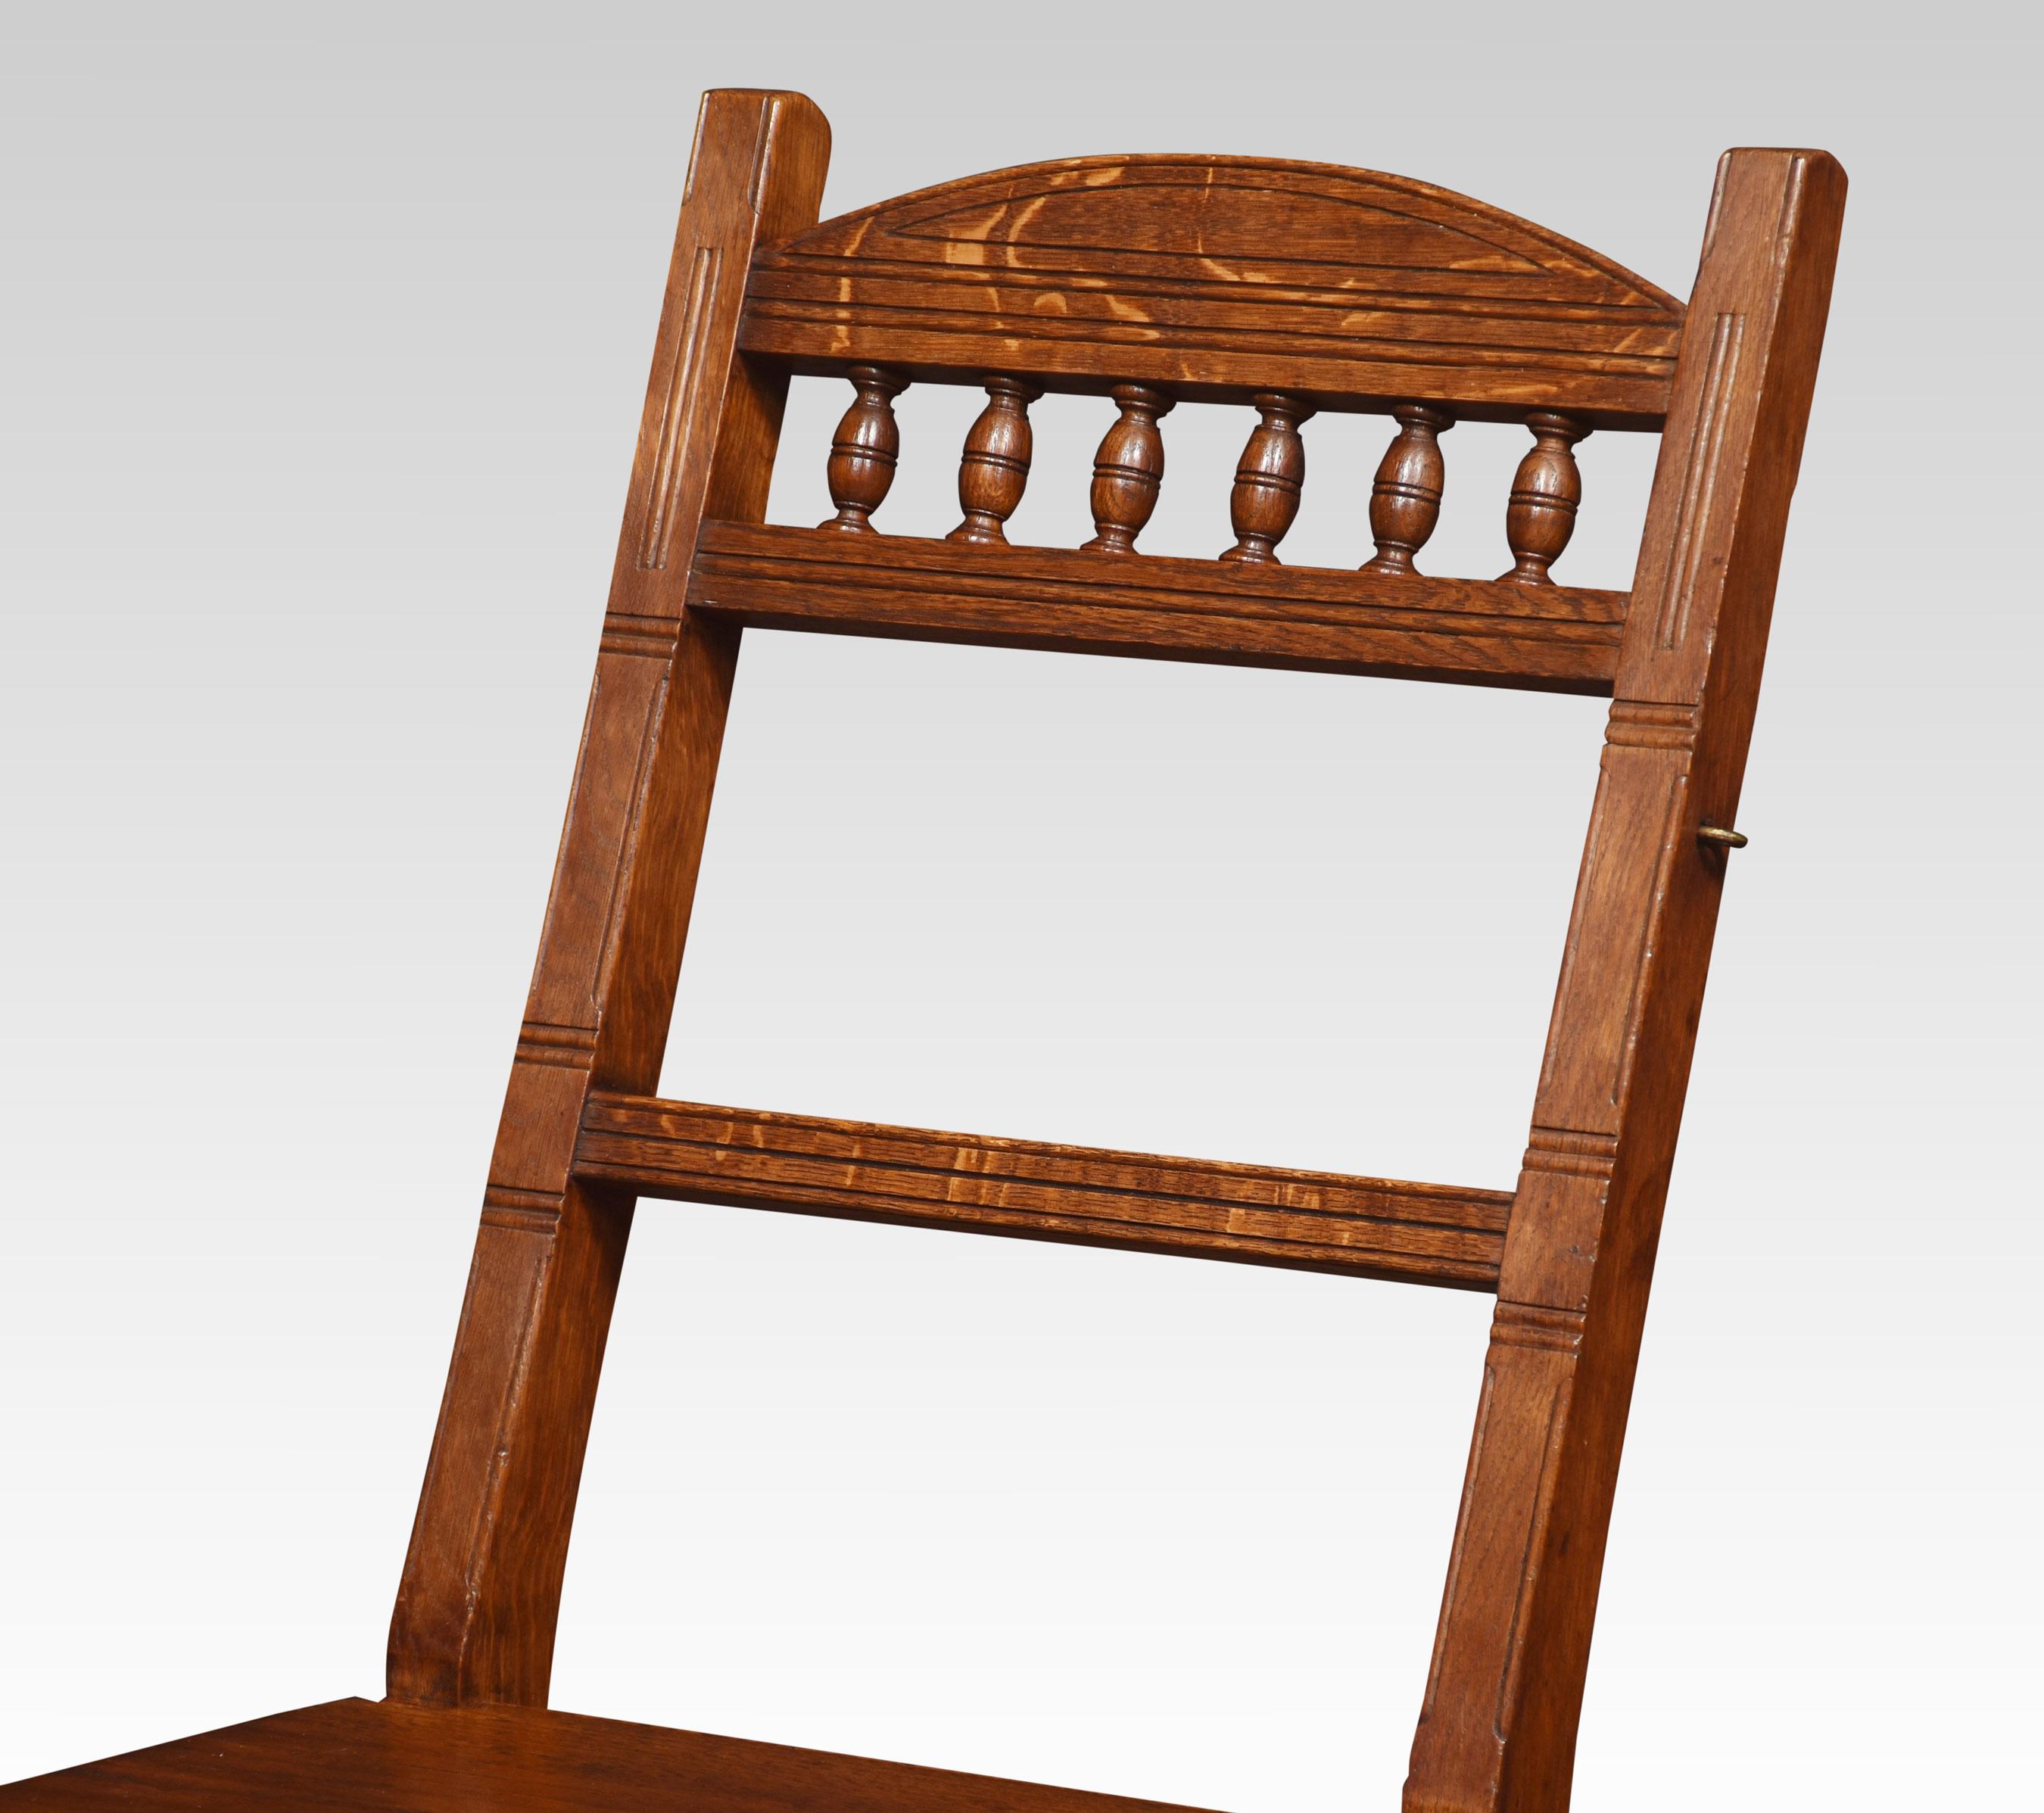 19th Century oak metamorphic chair, with spindle back above solid seat the chair opens into a sturdy set of Library steps.
Dimensions
Height 35 Inches height to seat 17.5 Inches
Width 17 Inches
Depth 20 Inches